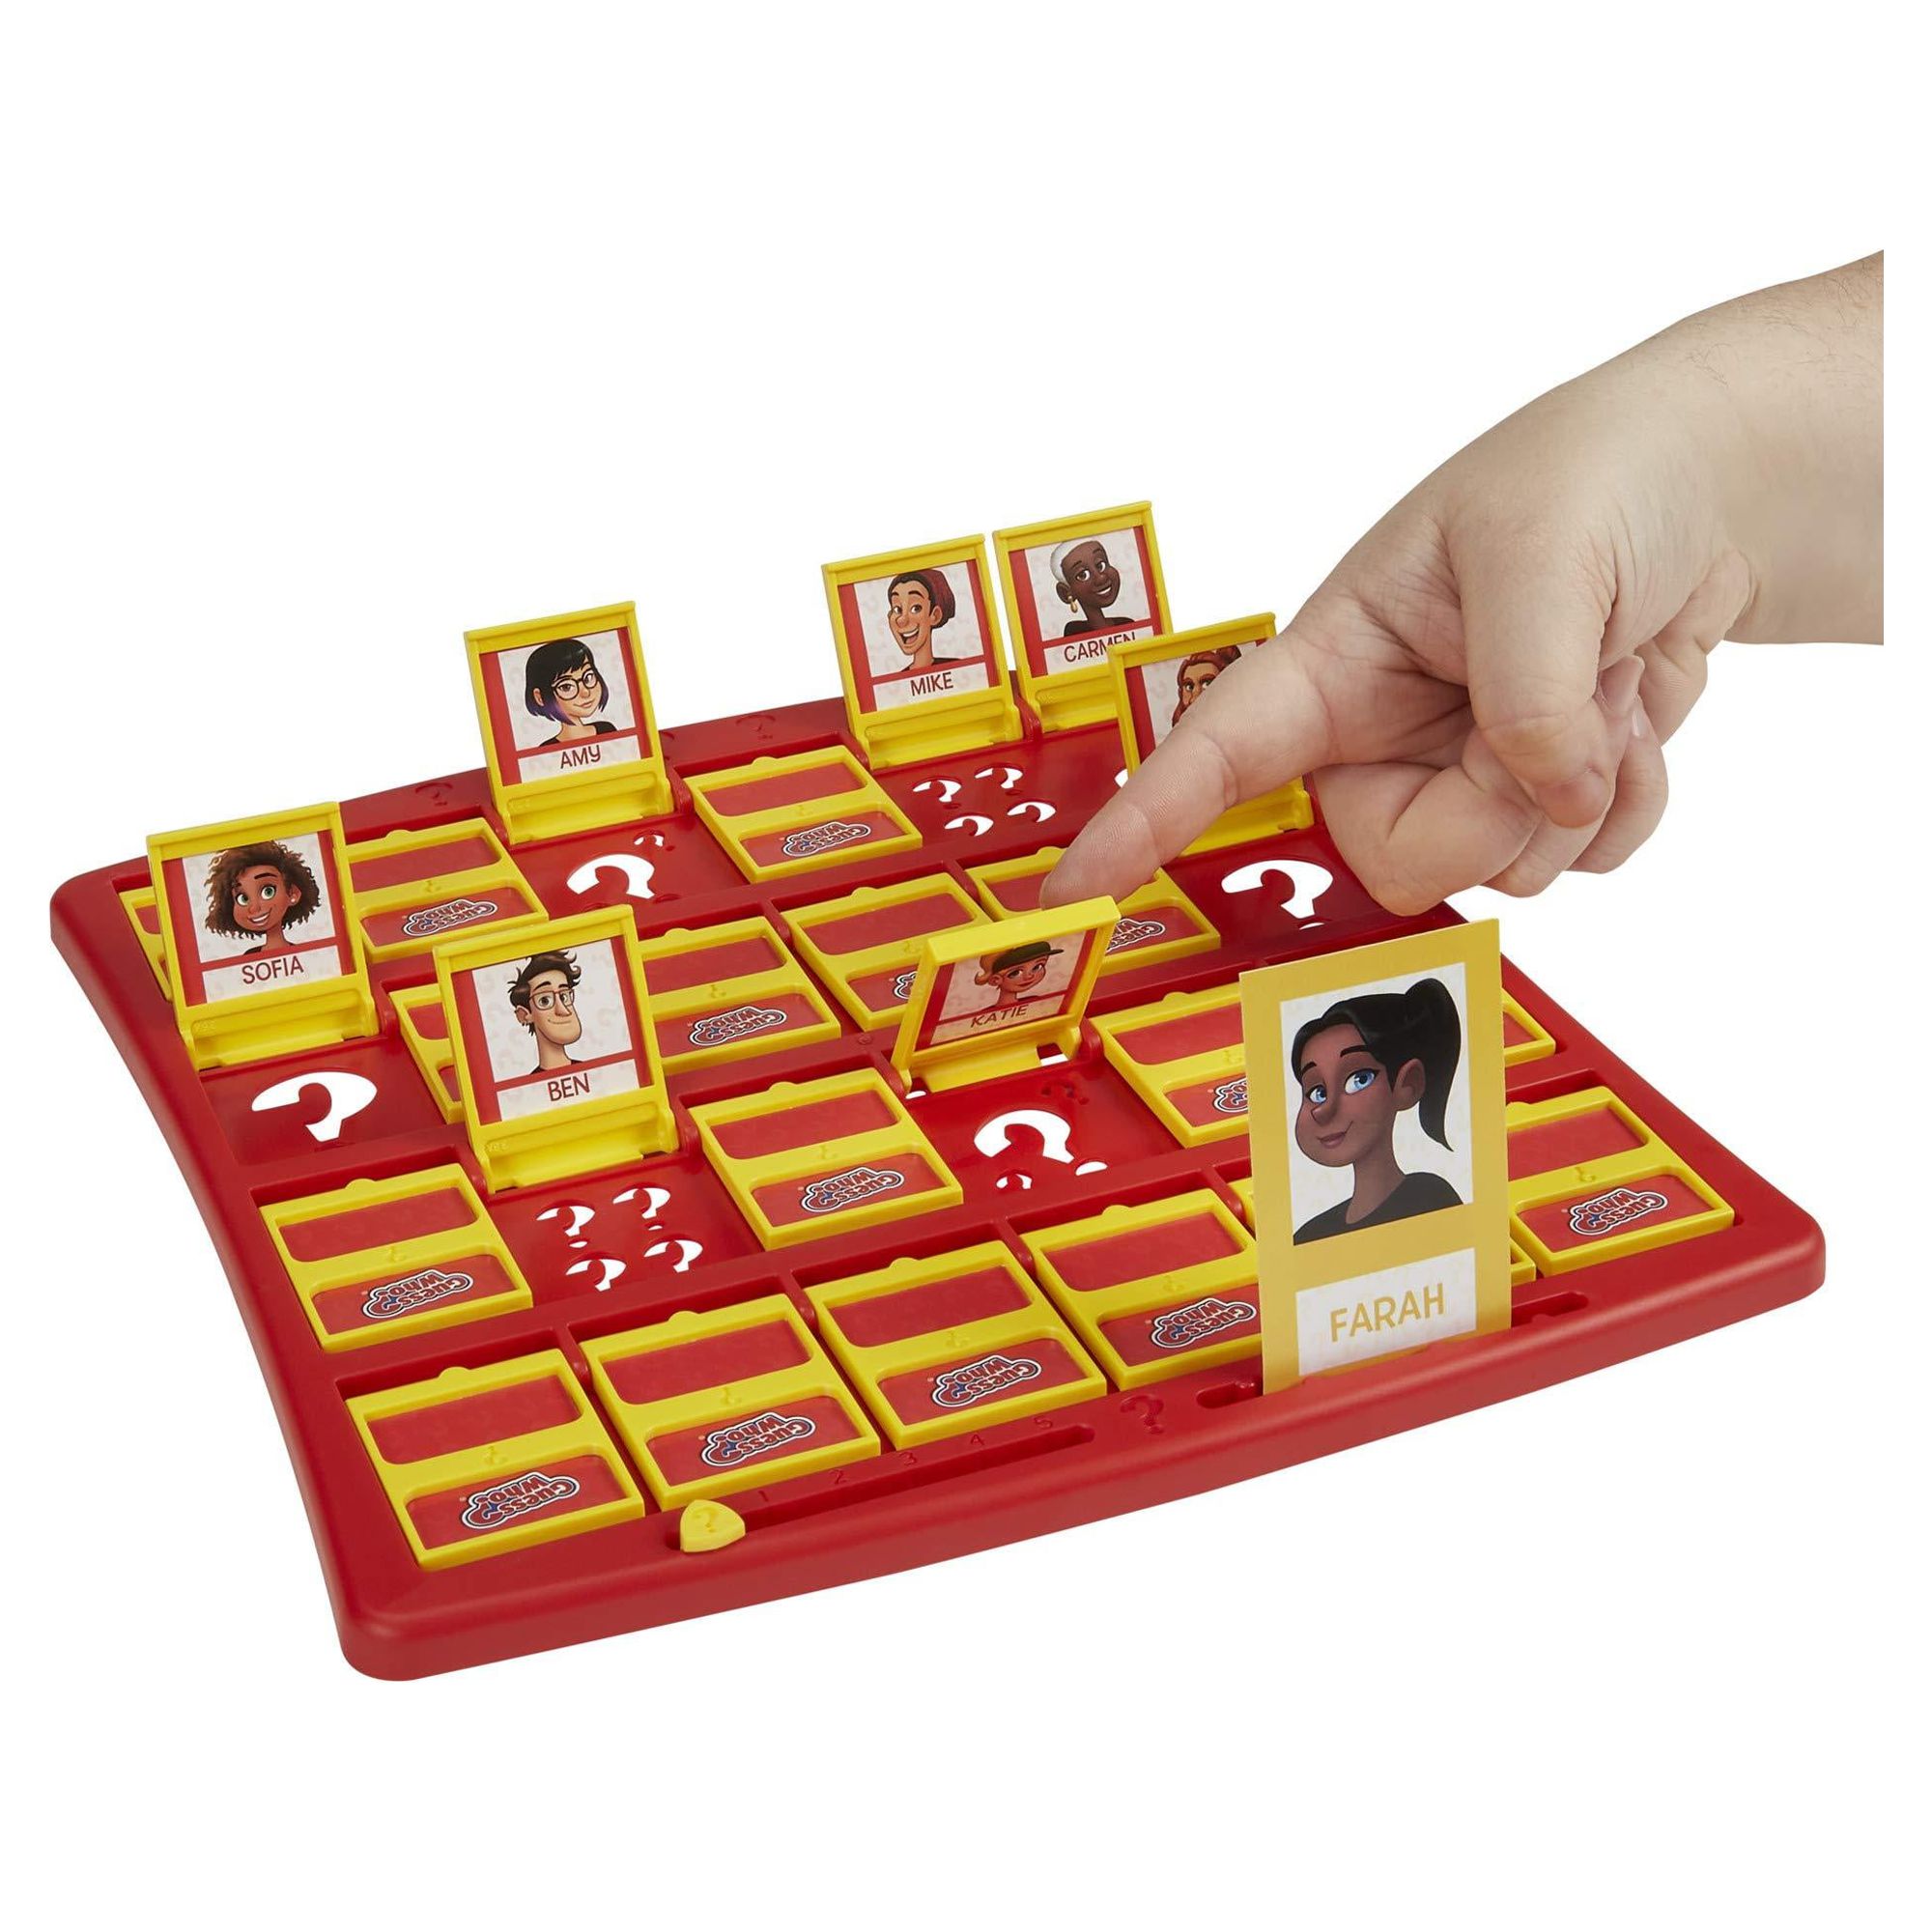 Guess Who? Board Game, Original Guessing Game for Kids, for 2 Players - image 5 of 11